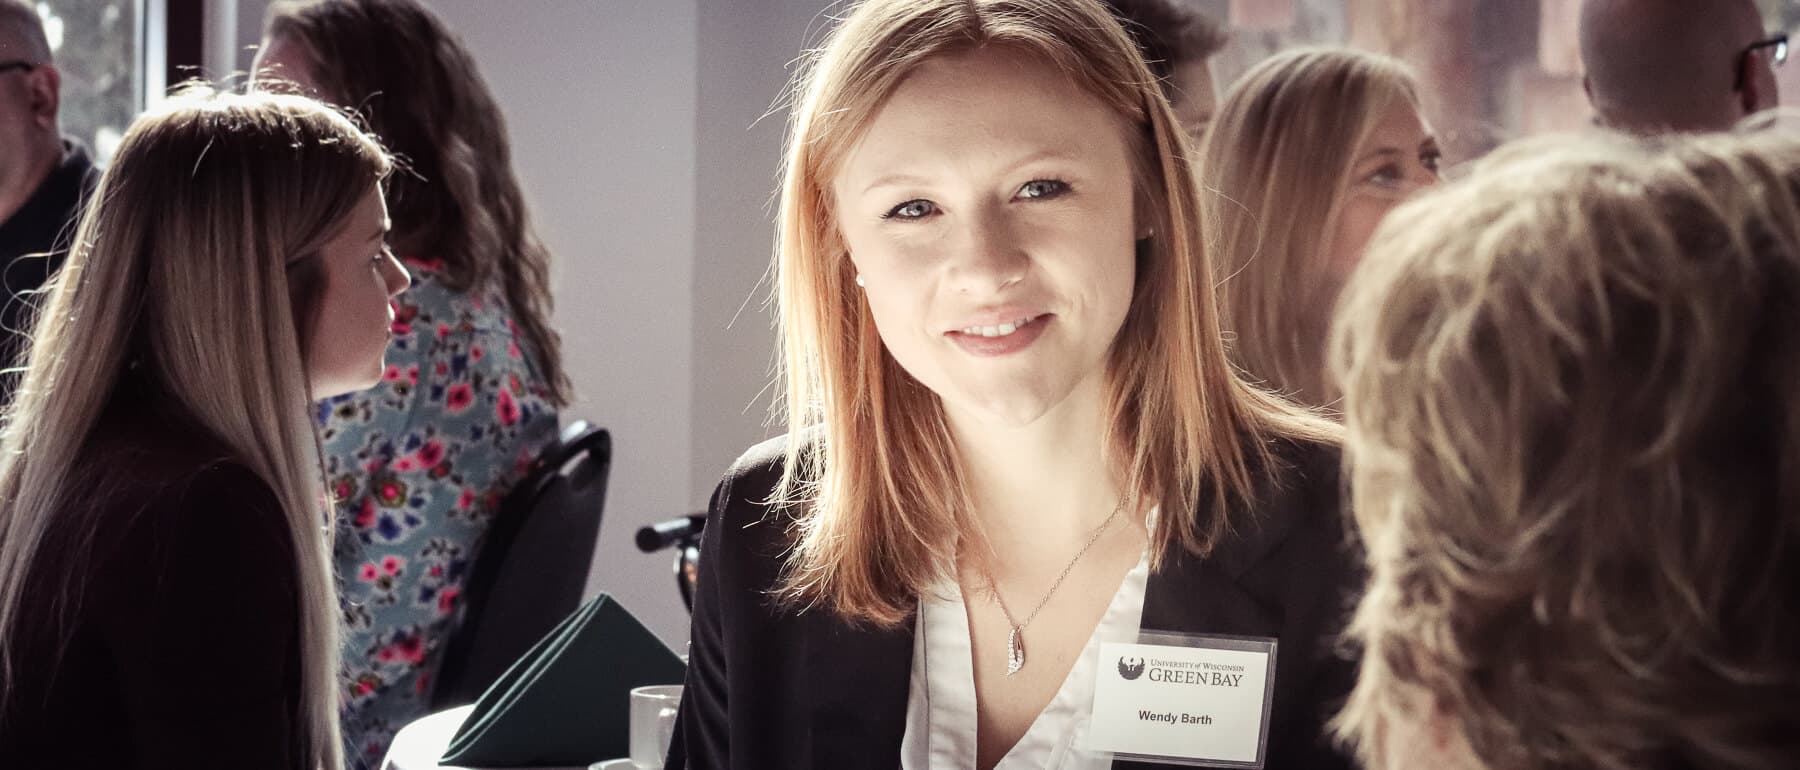 A UWGB business student at a networking luncheon